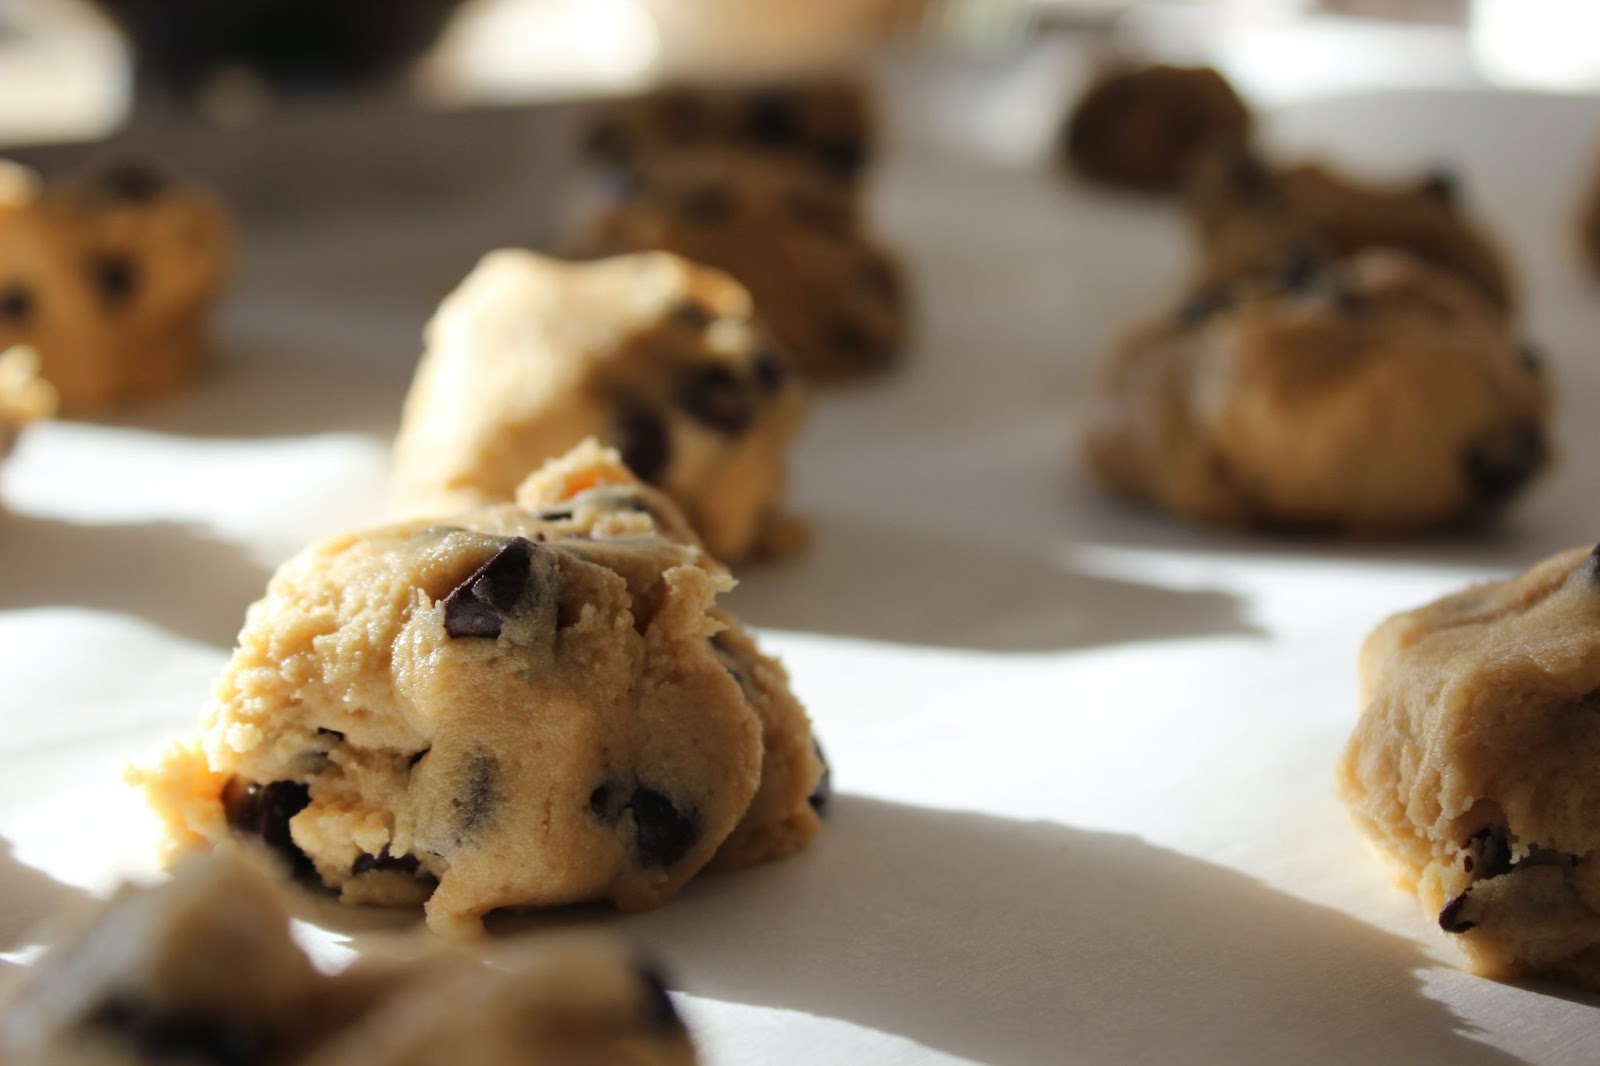 Image shows a batch of cookie dough, ready to be baked.